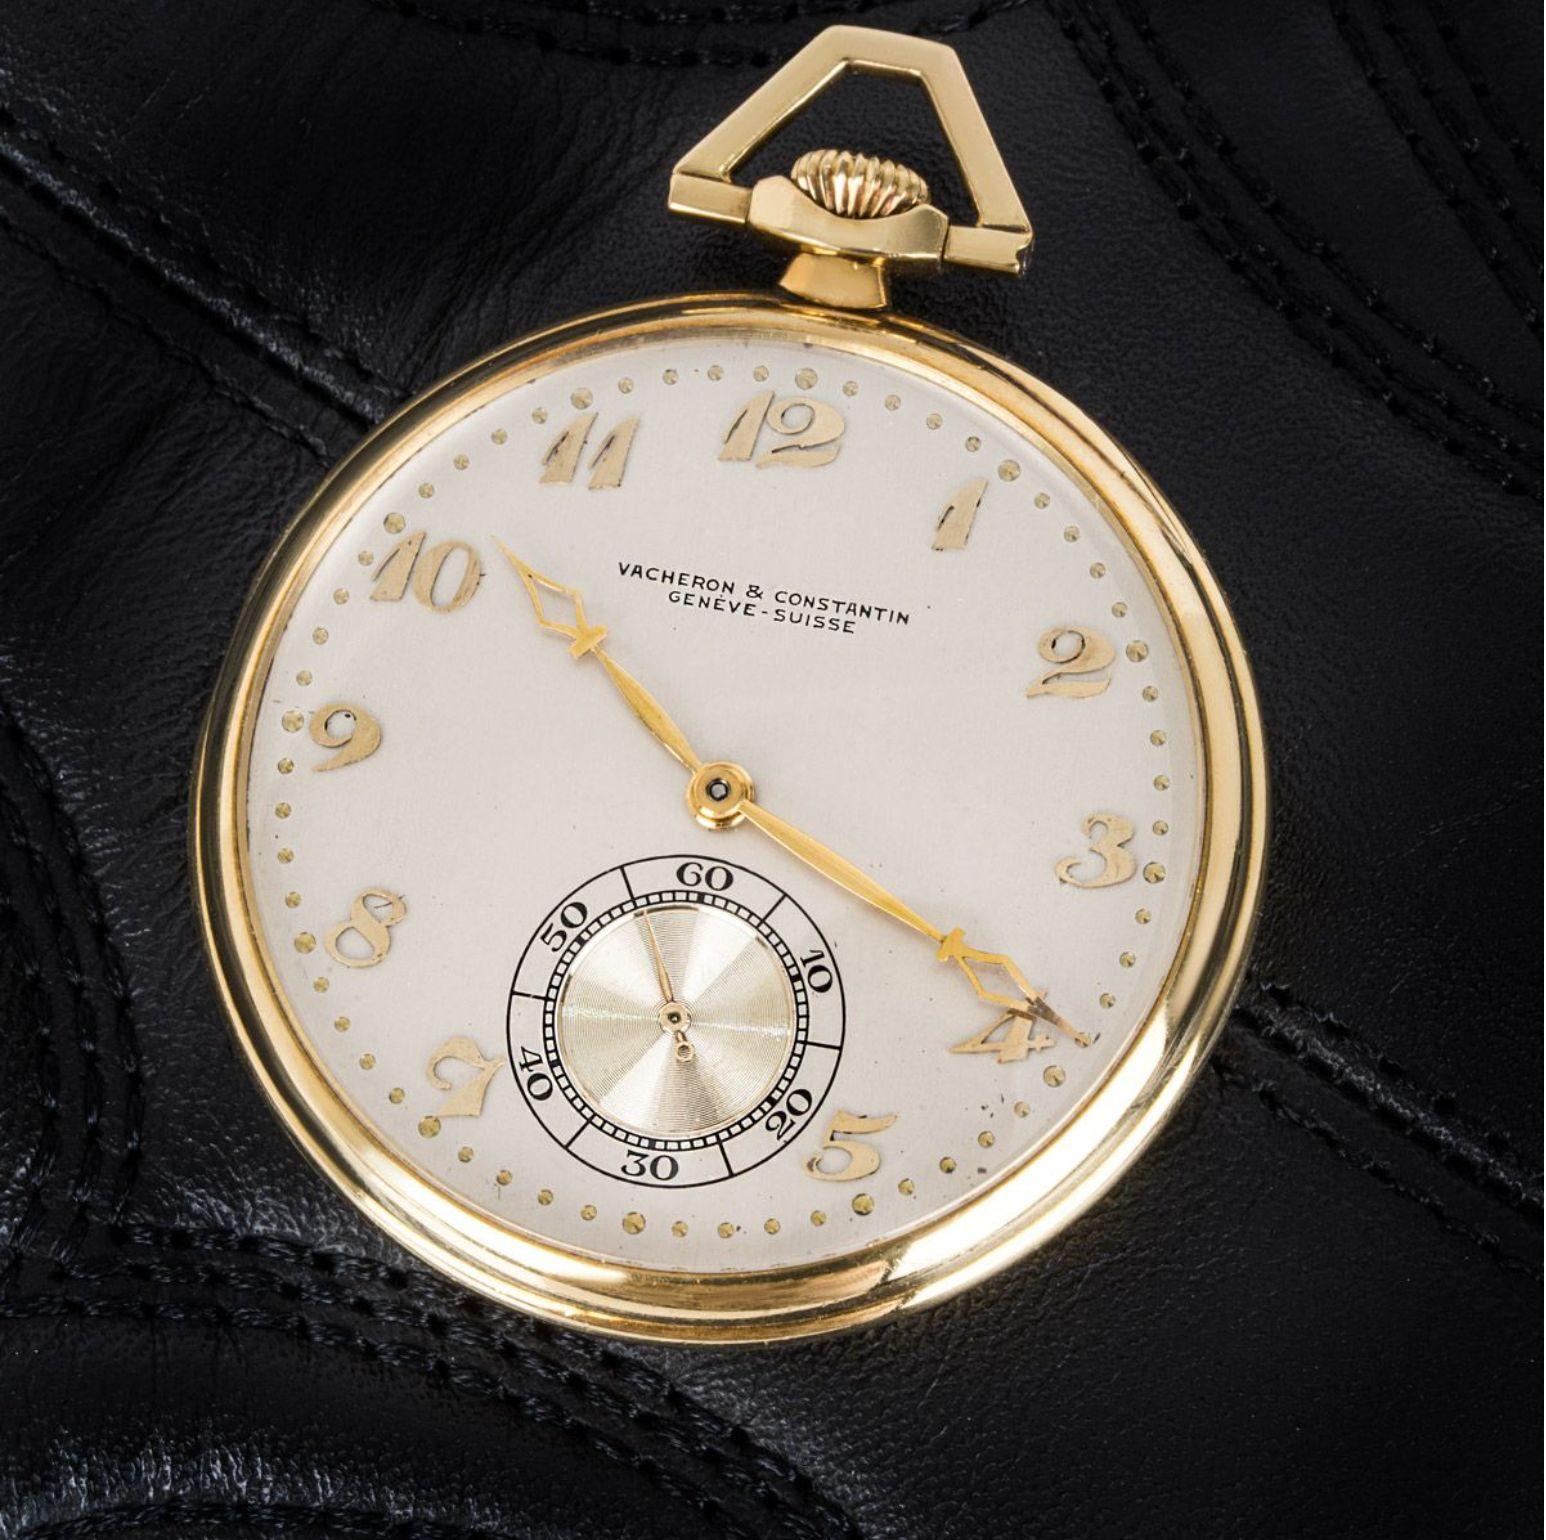 Vacheron Constantin. A 18ct Yellow Gold Keyless Lever Open face Pocket Watch C1920s

Dial: The fully signed Vacheron & Constantin Geneve- Suisse silver satin finished dial with gold Breguet numerals outer gold minute dots and susidiary seconds dial